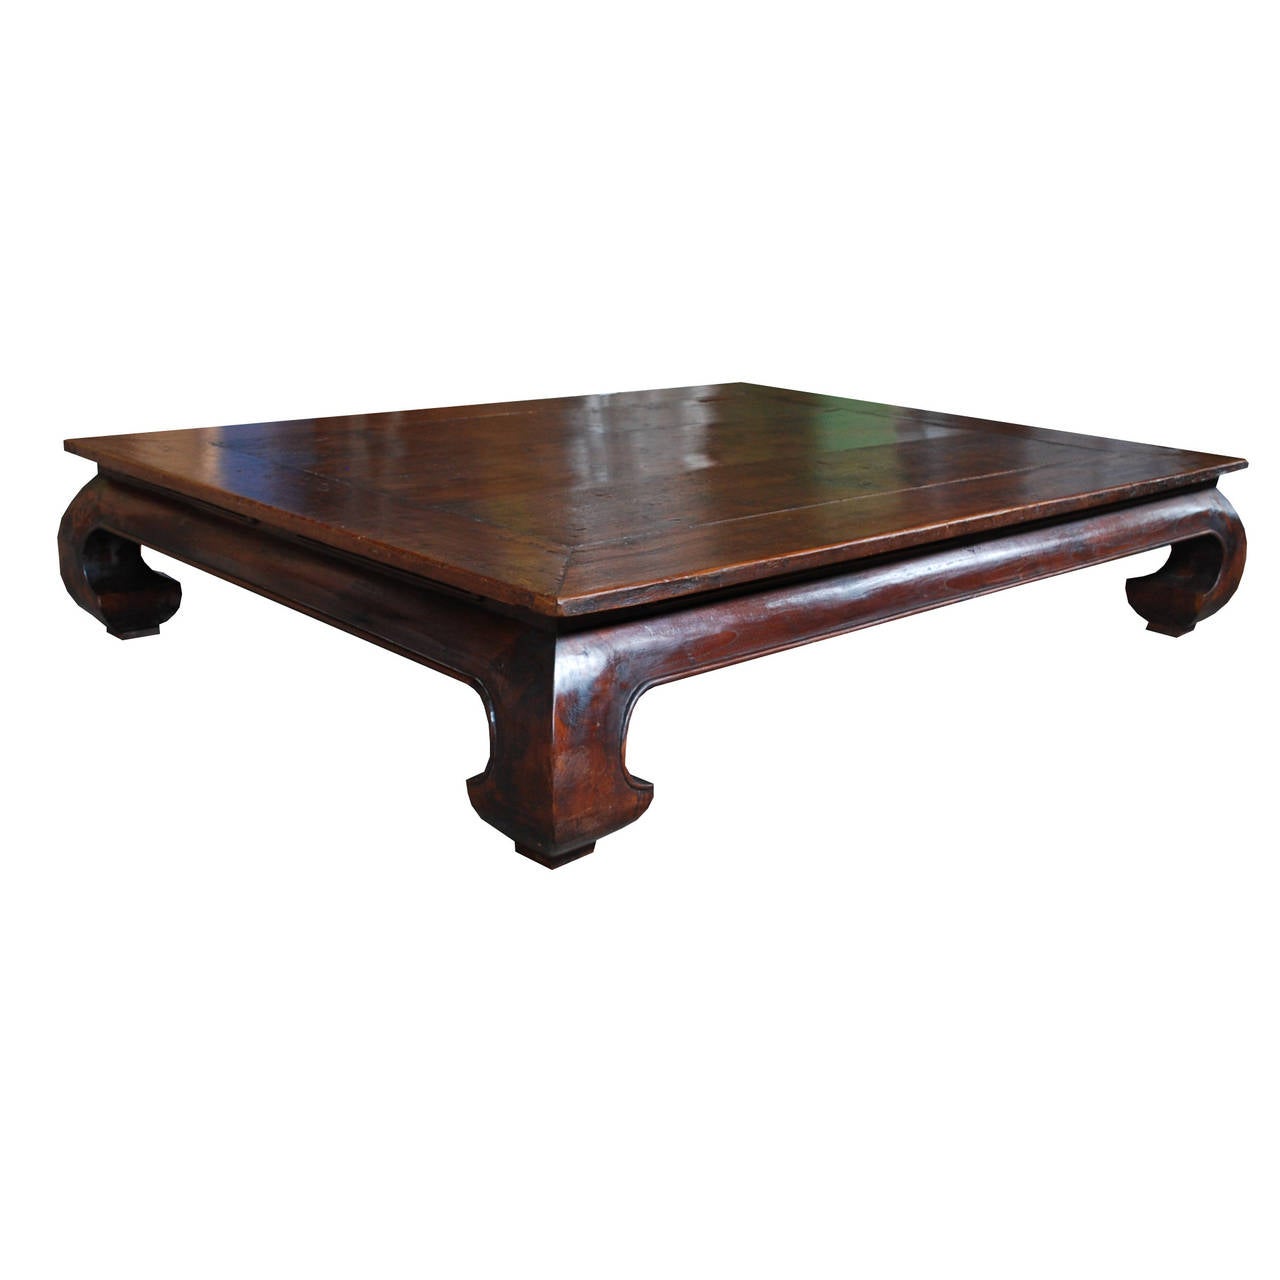 20th century colonial opium leg table made of teakwood.
Originates Indonesia, dating circa 1950.
(Shipping costs on request, depends on destination).